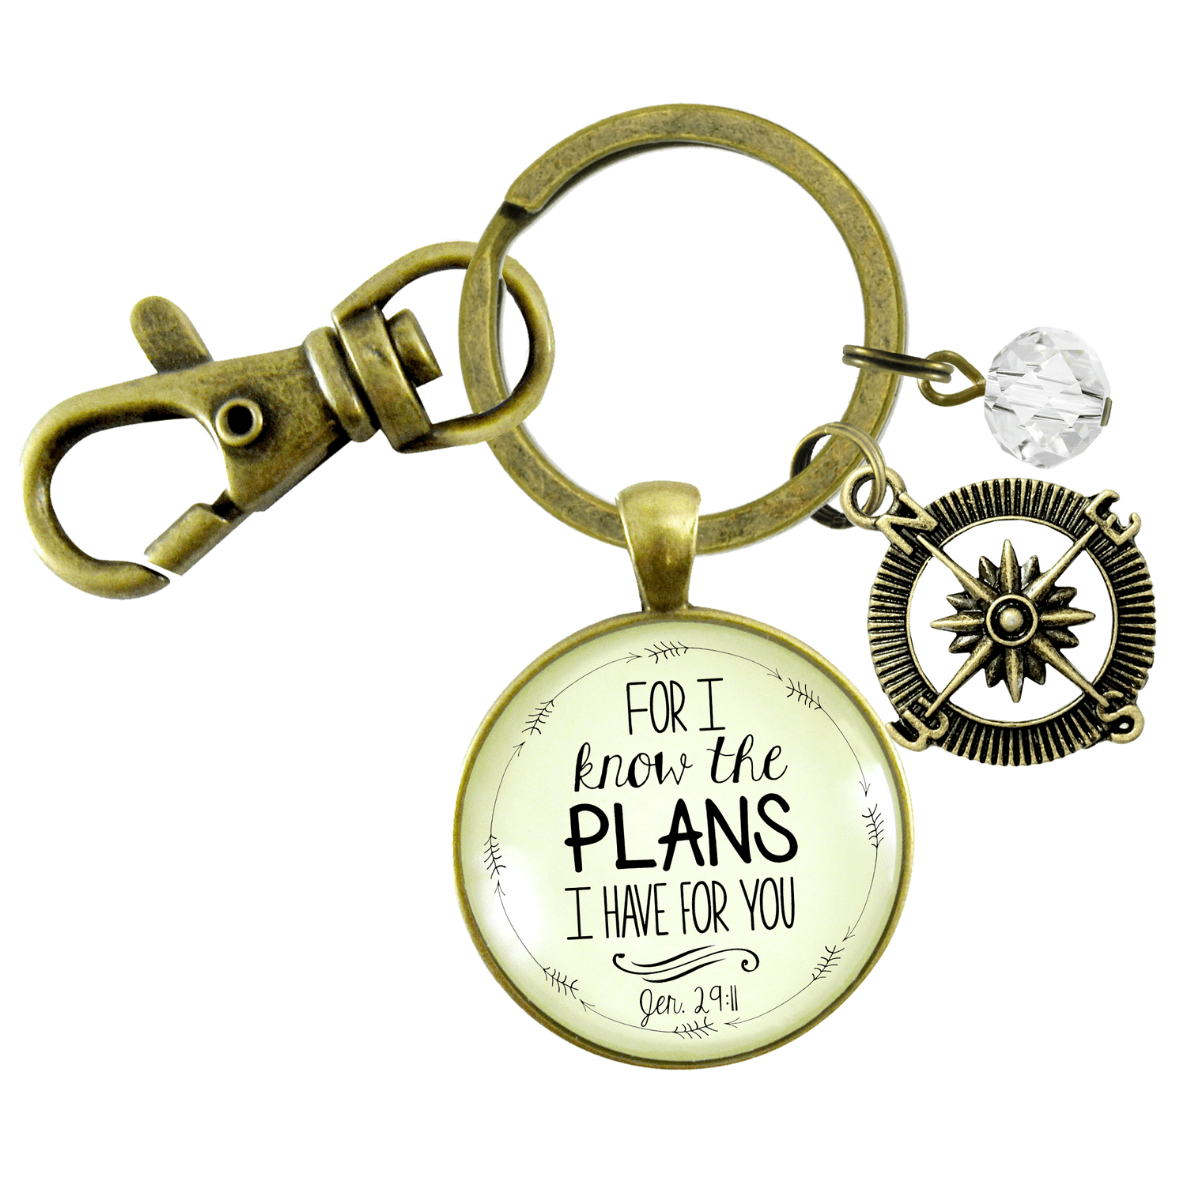 Faith Keychain For I Know the Plans I Have For You Jeremiah Compass Clear Bead Charms - Gutsy Goodness Handmade Jewelry;Faith Keychain For I Know The Plans I Have For You Jeremiah Compass Clear Bead Charms - Gutsy Goodness Handmade Jewelry Gifts